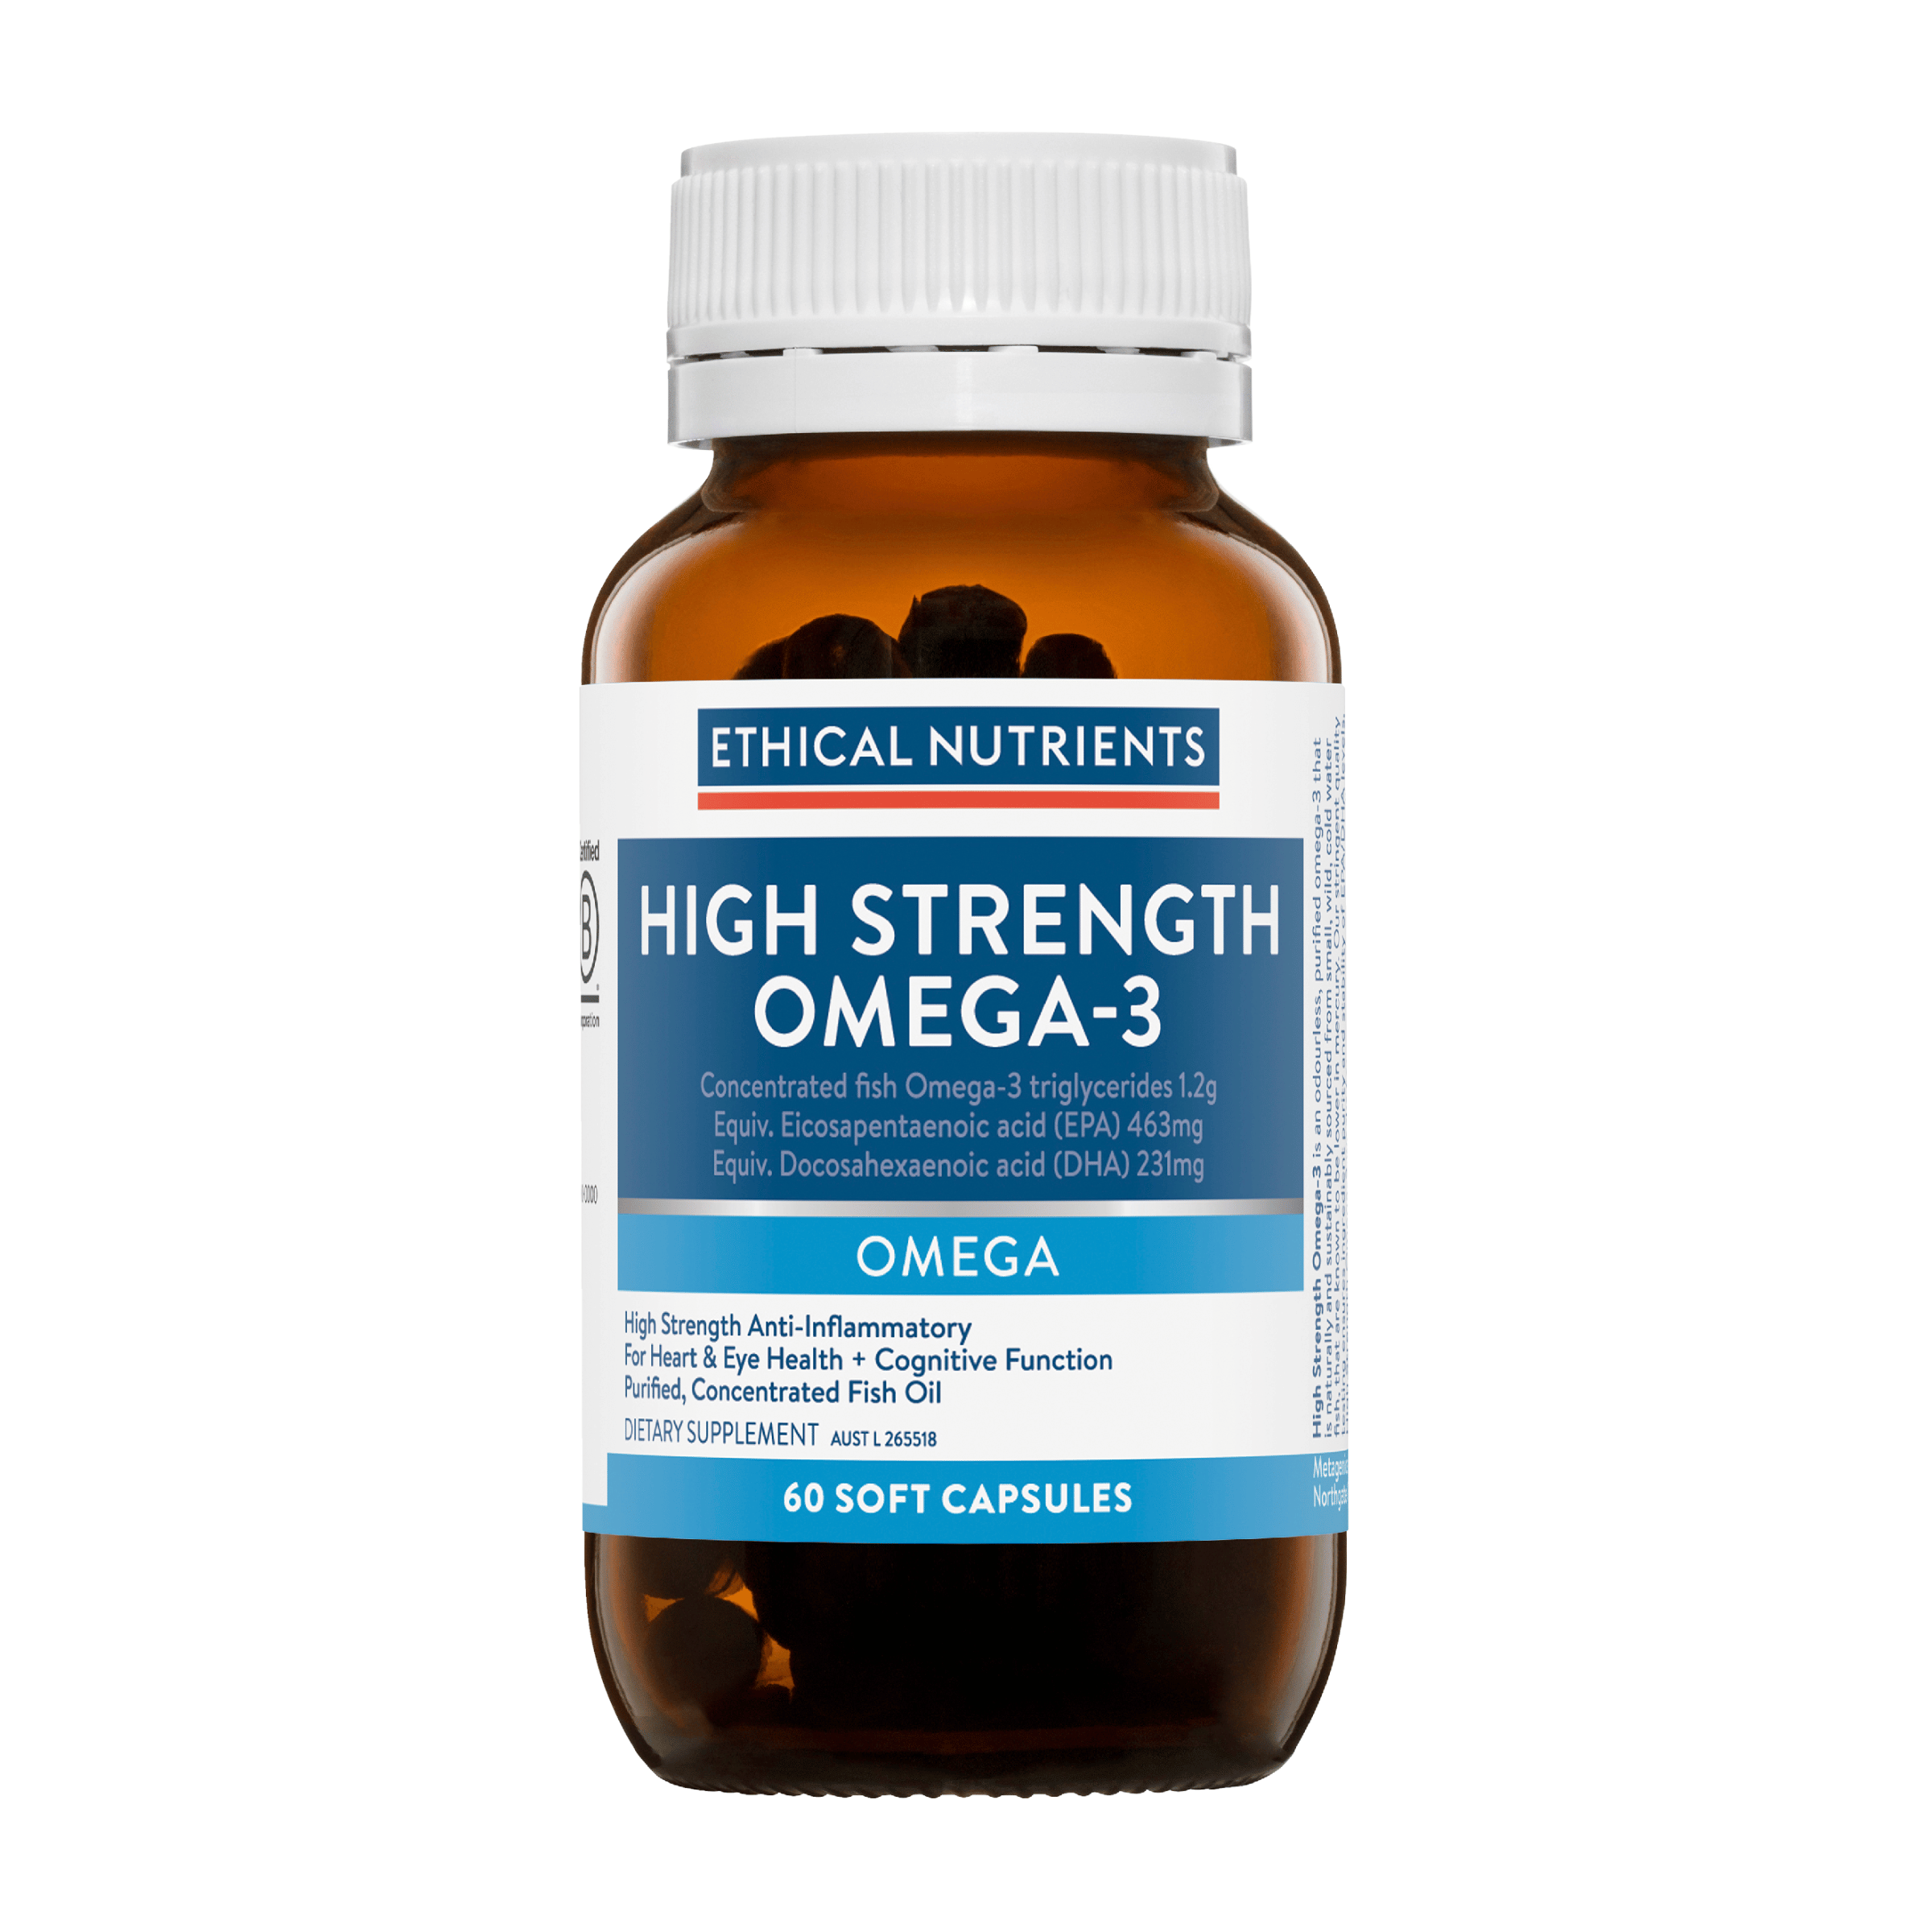 Ethical Nutrients High Strength Omega-3 60 Capsules #size_60 soft capsules